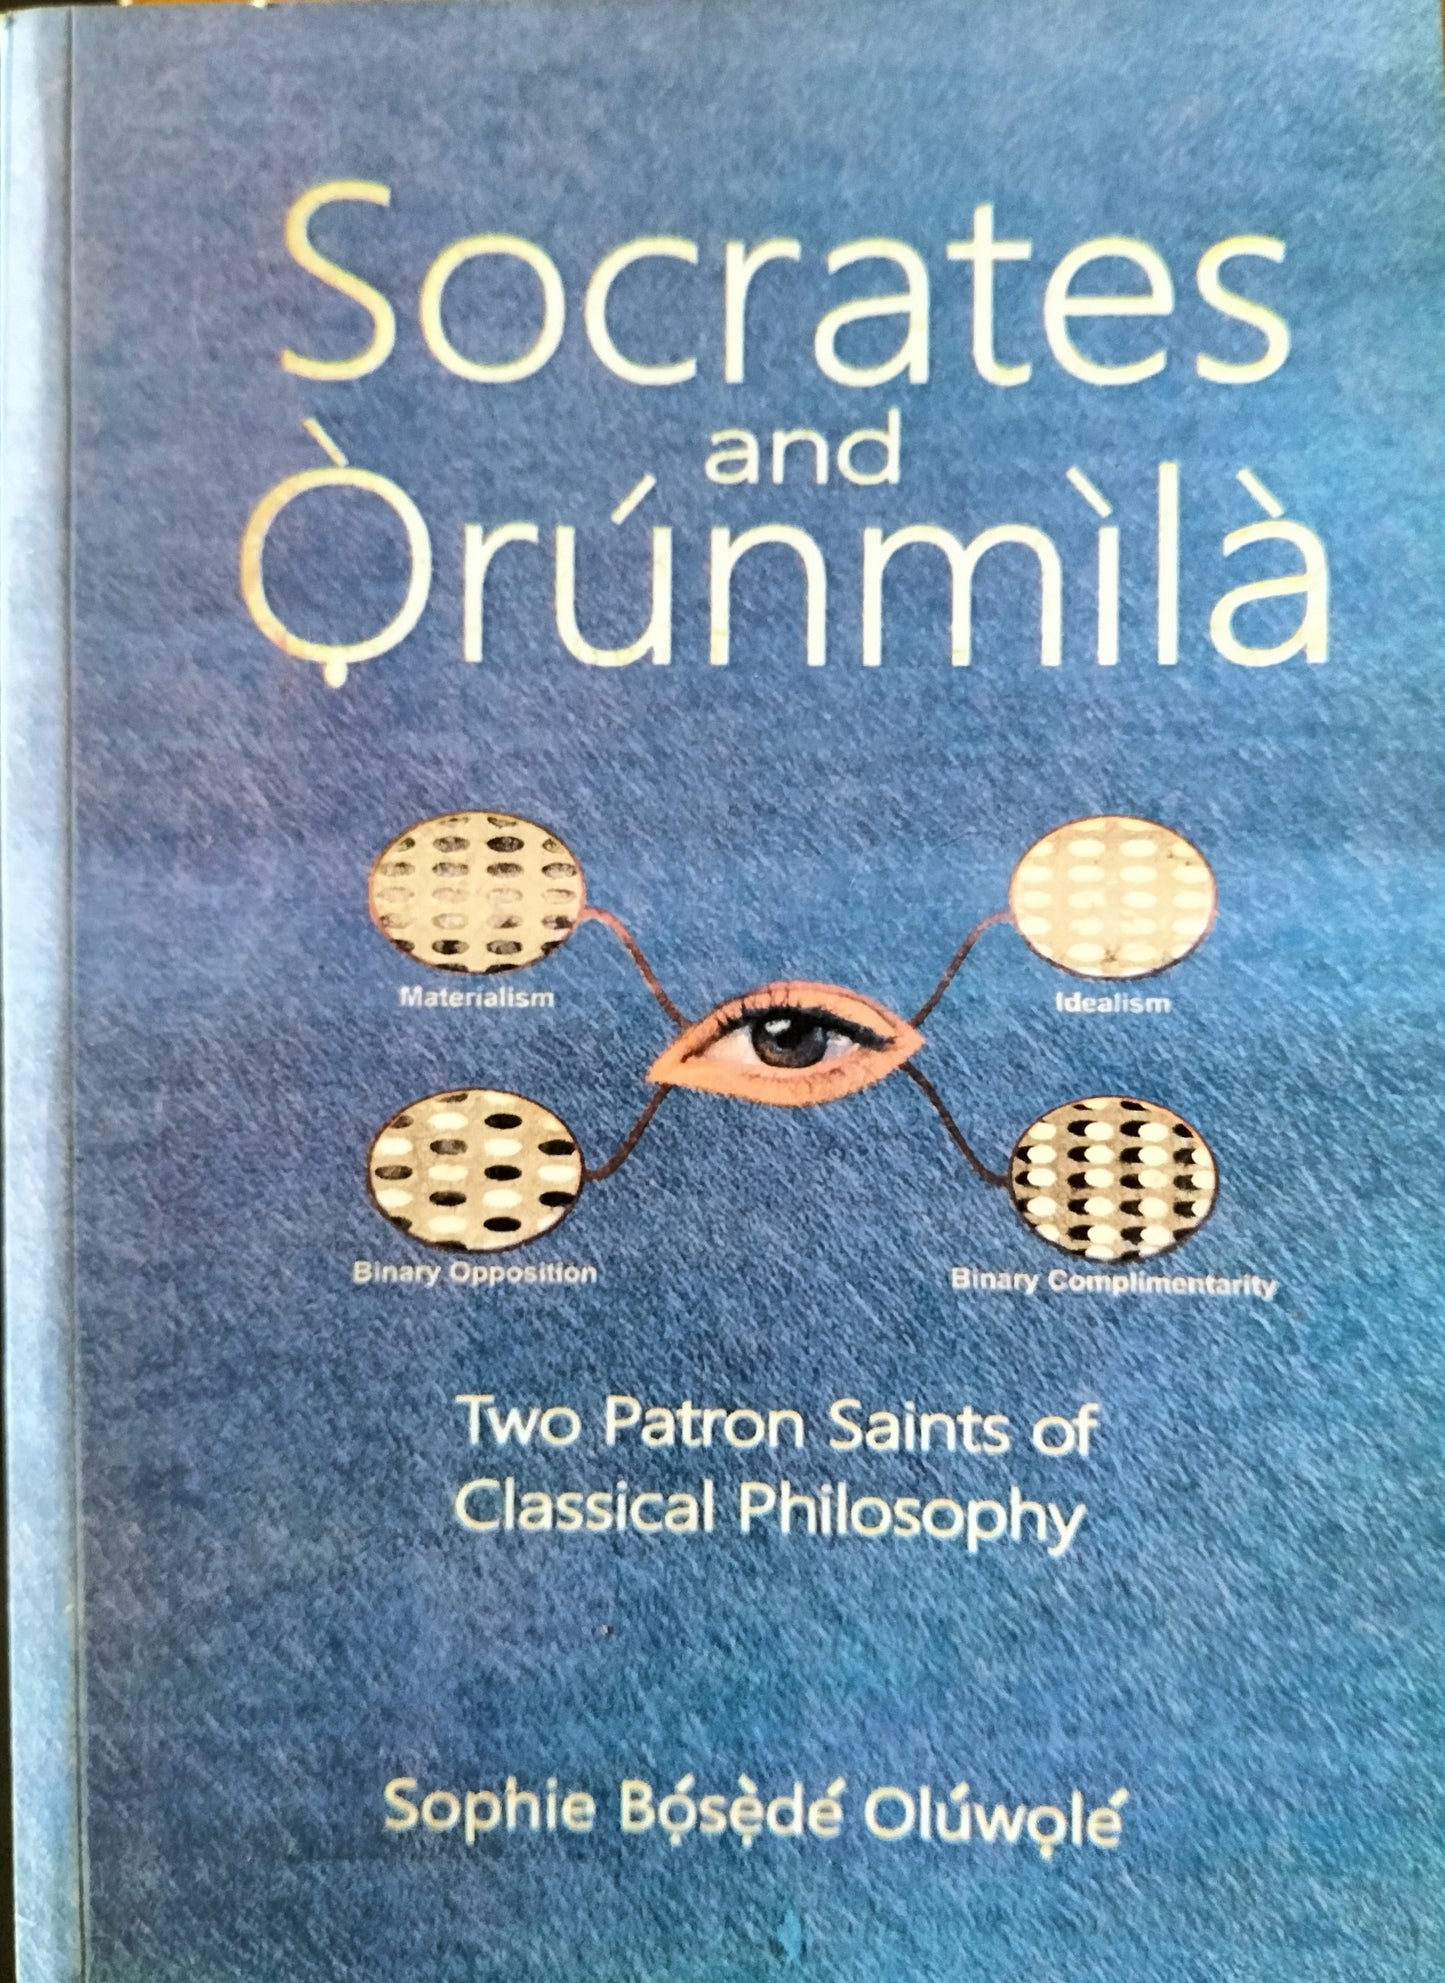 Socrates and Orunmila. Two Patron Saints of Classical Philosophy by Sophie Bosede Oluwole